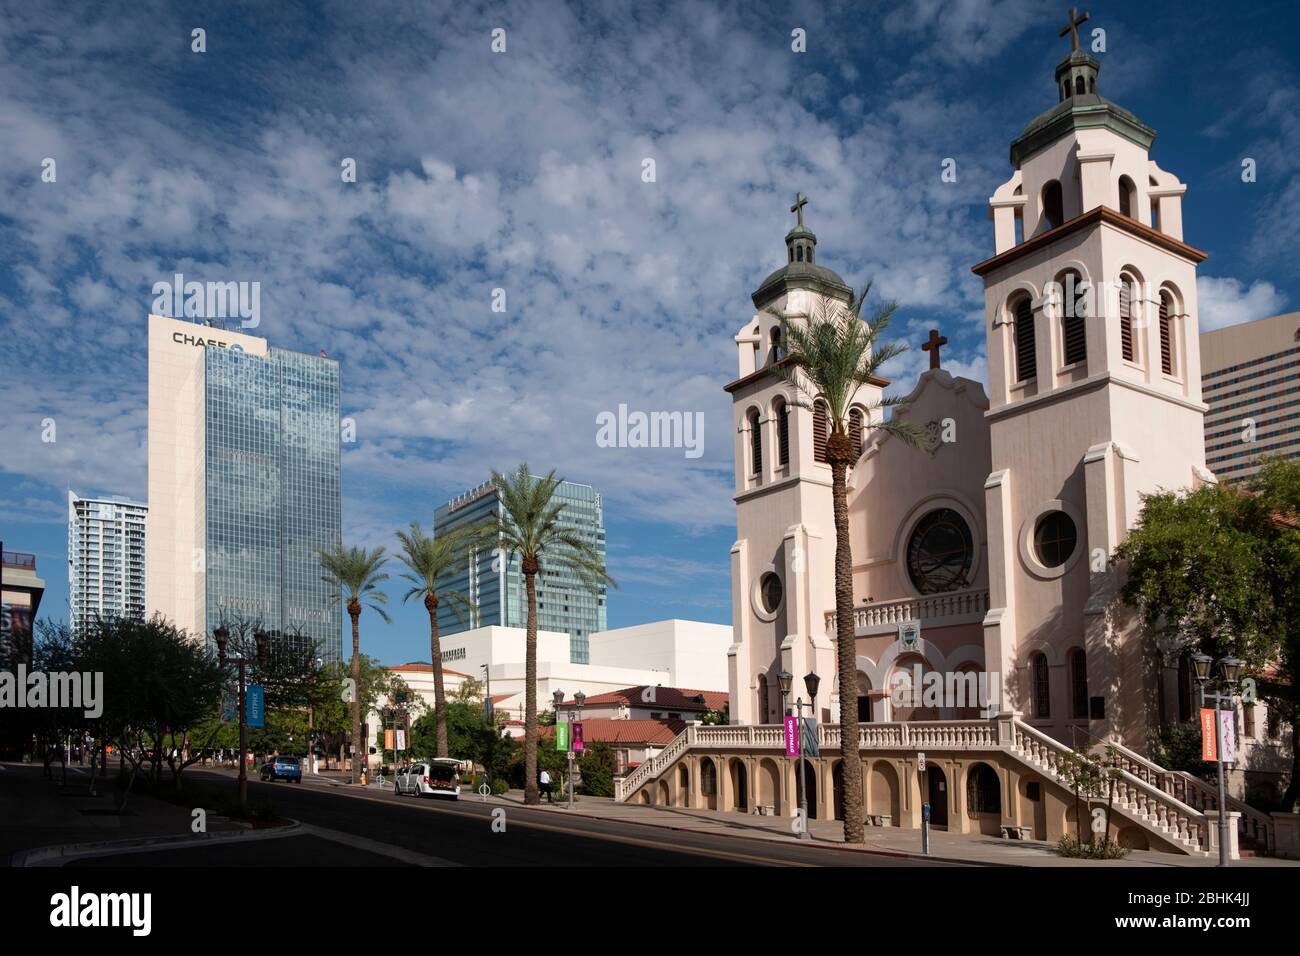 view of St. Mary's Basilica and the Chase Tower in downtown Phoenix, Arizona Stock Photo